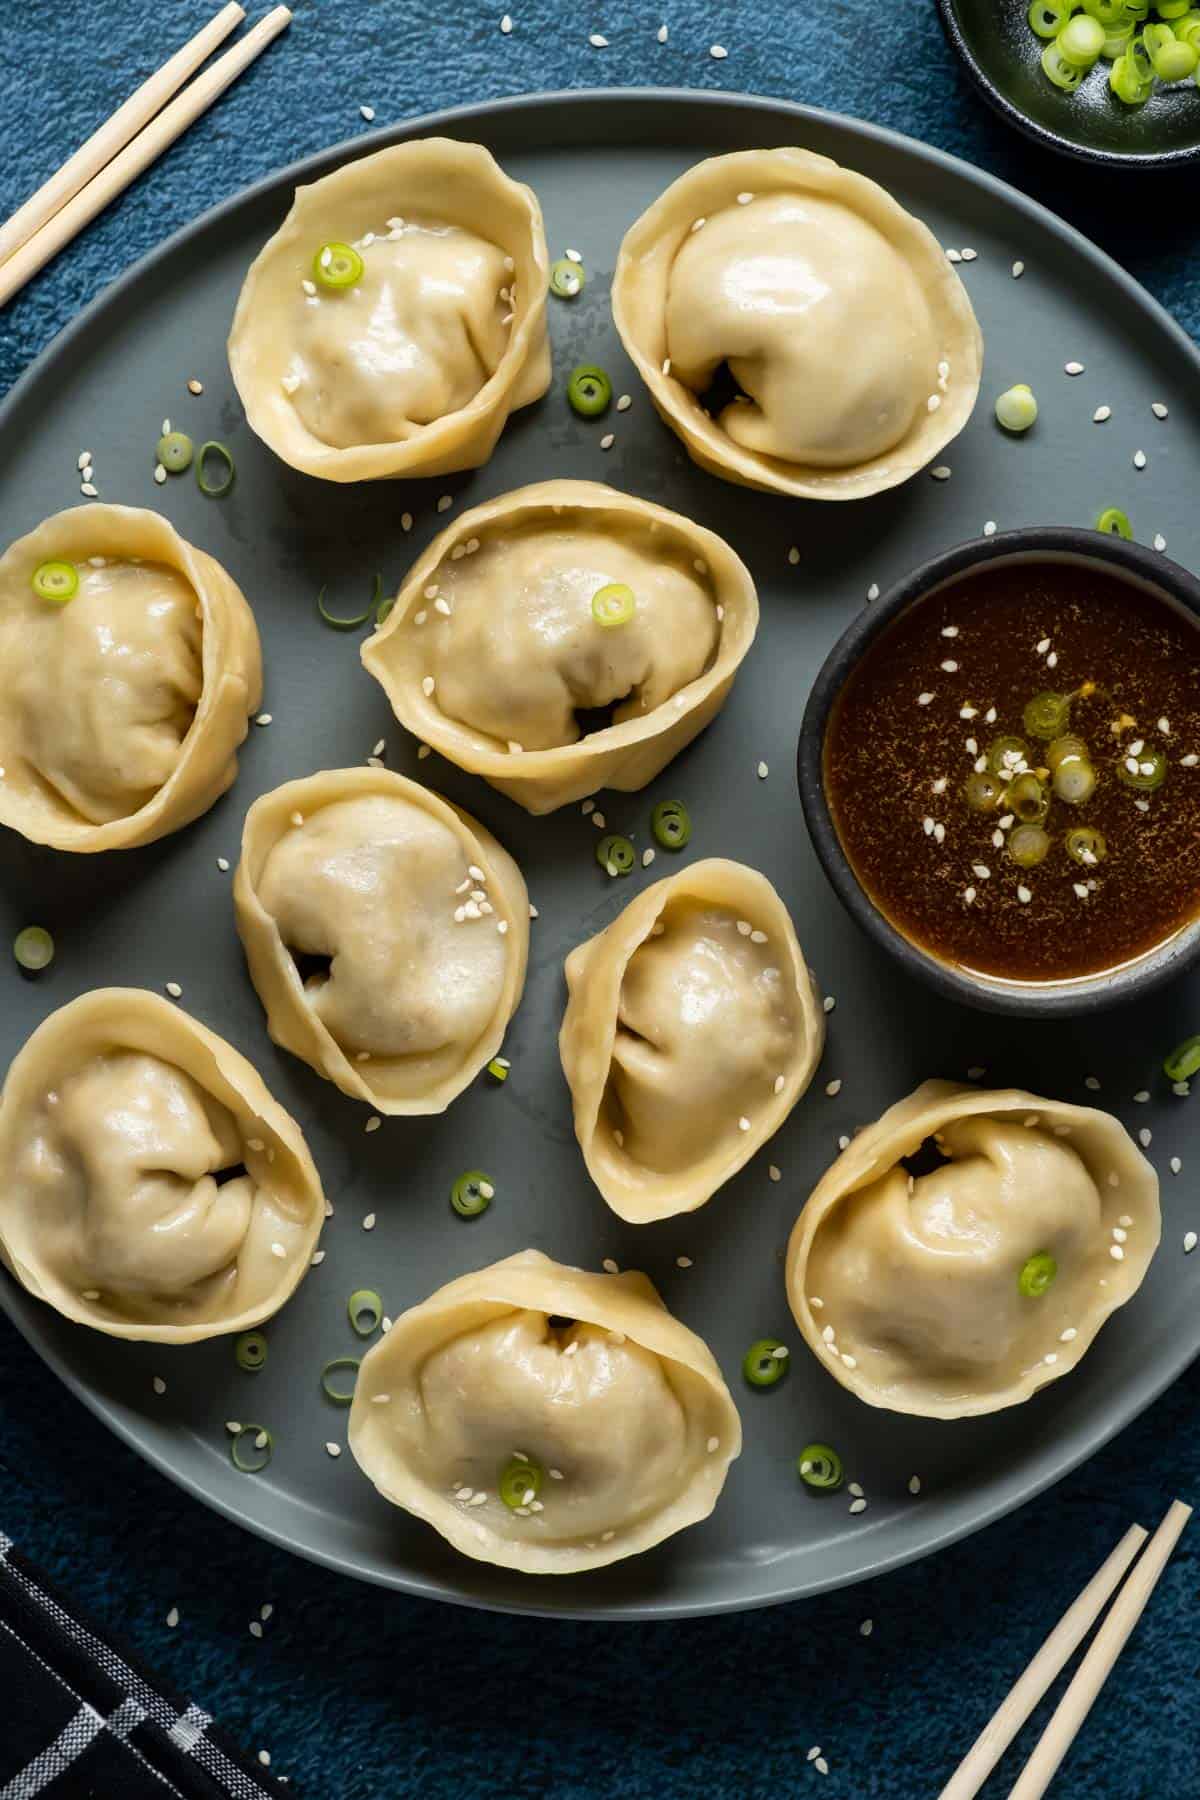 Dumplings topped with chopped green onions on a plate with dipping sauce.